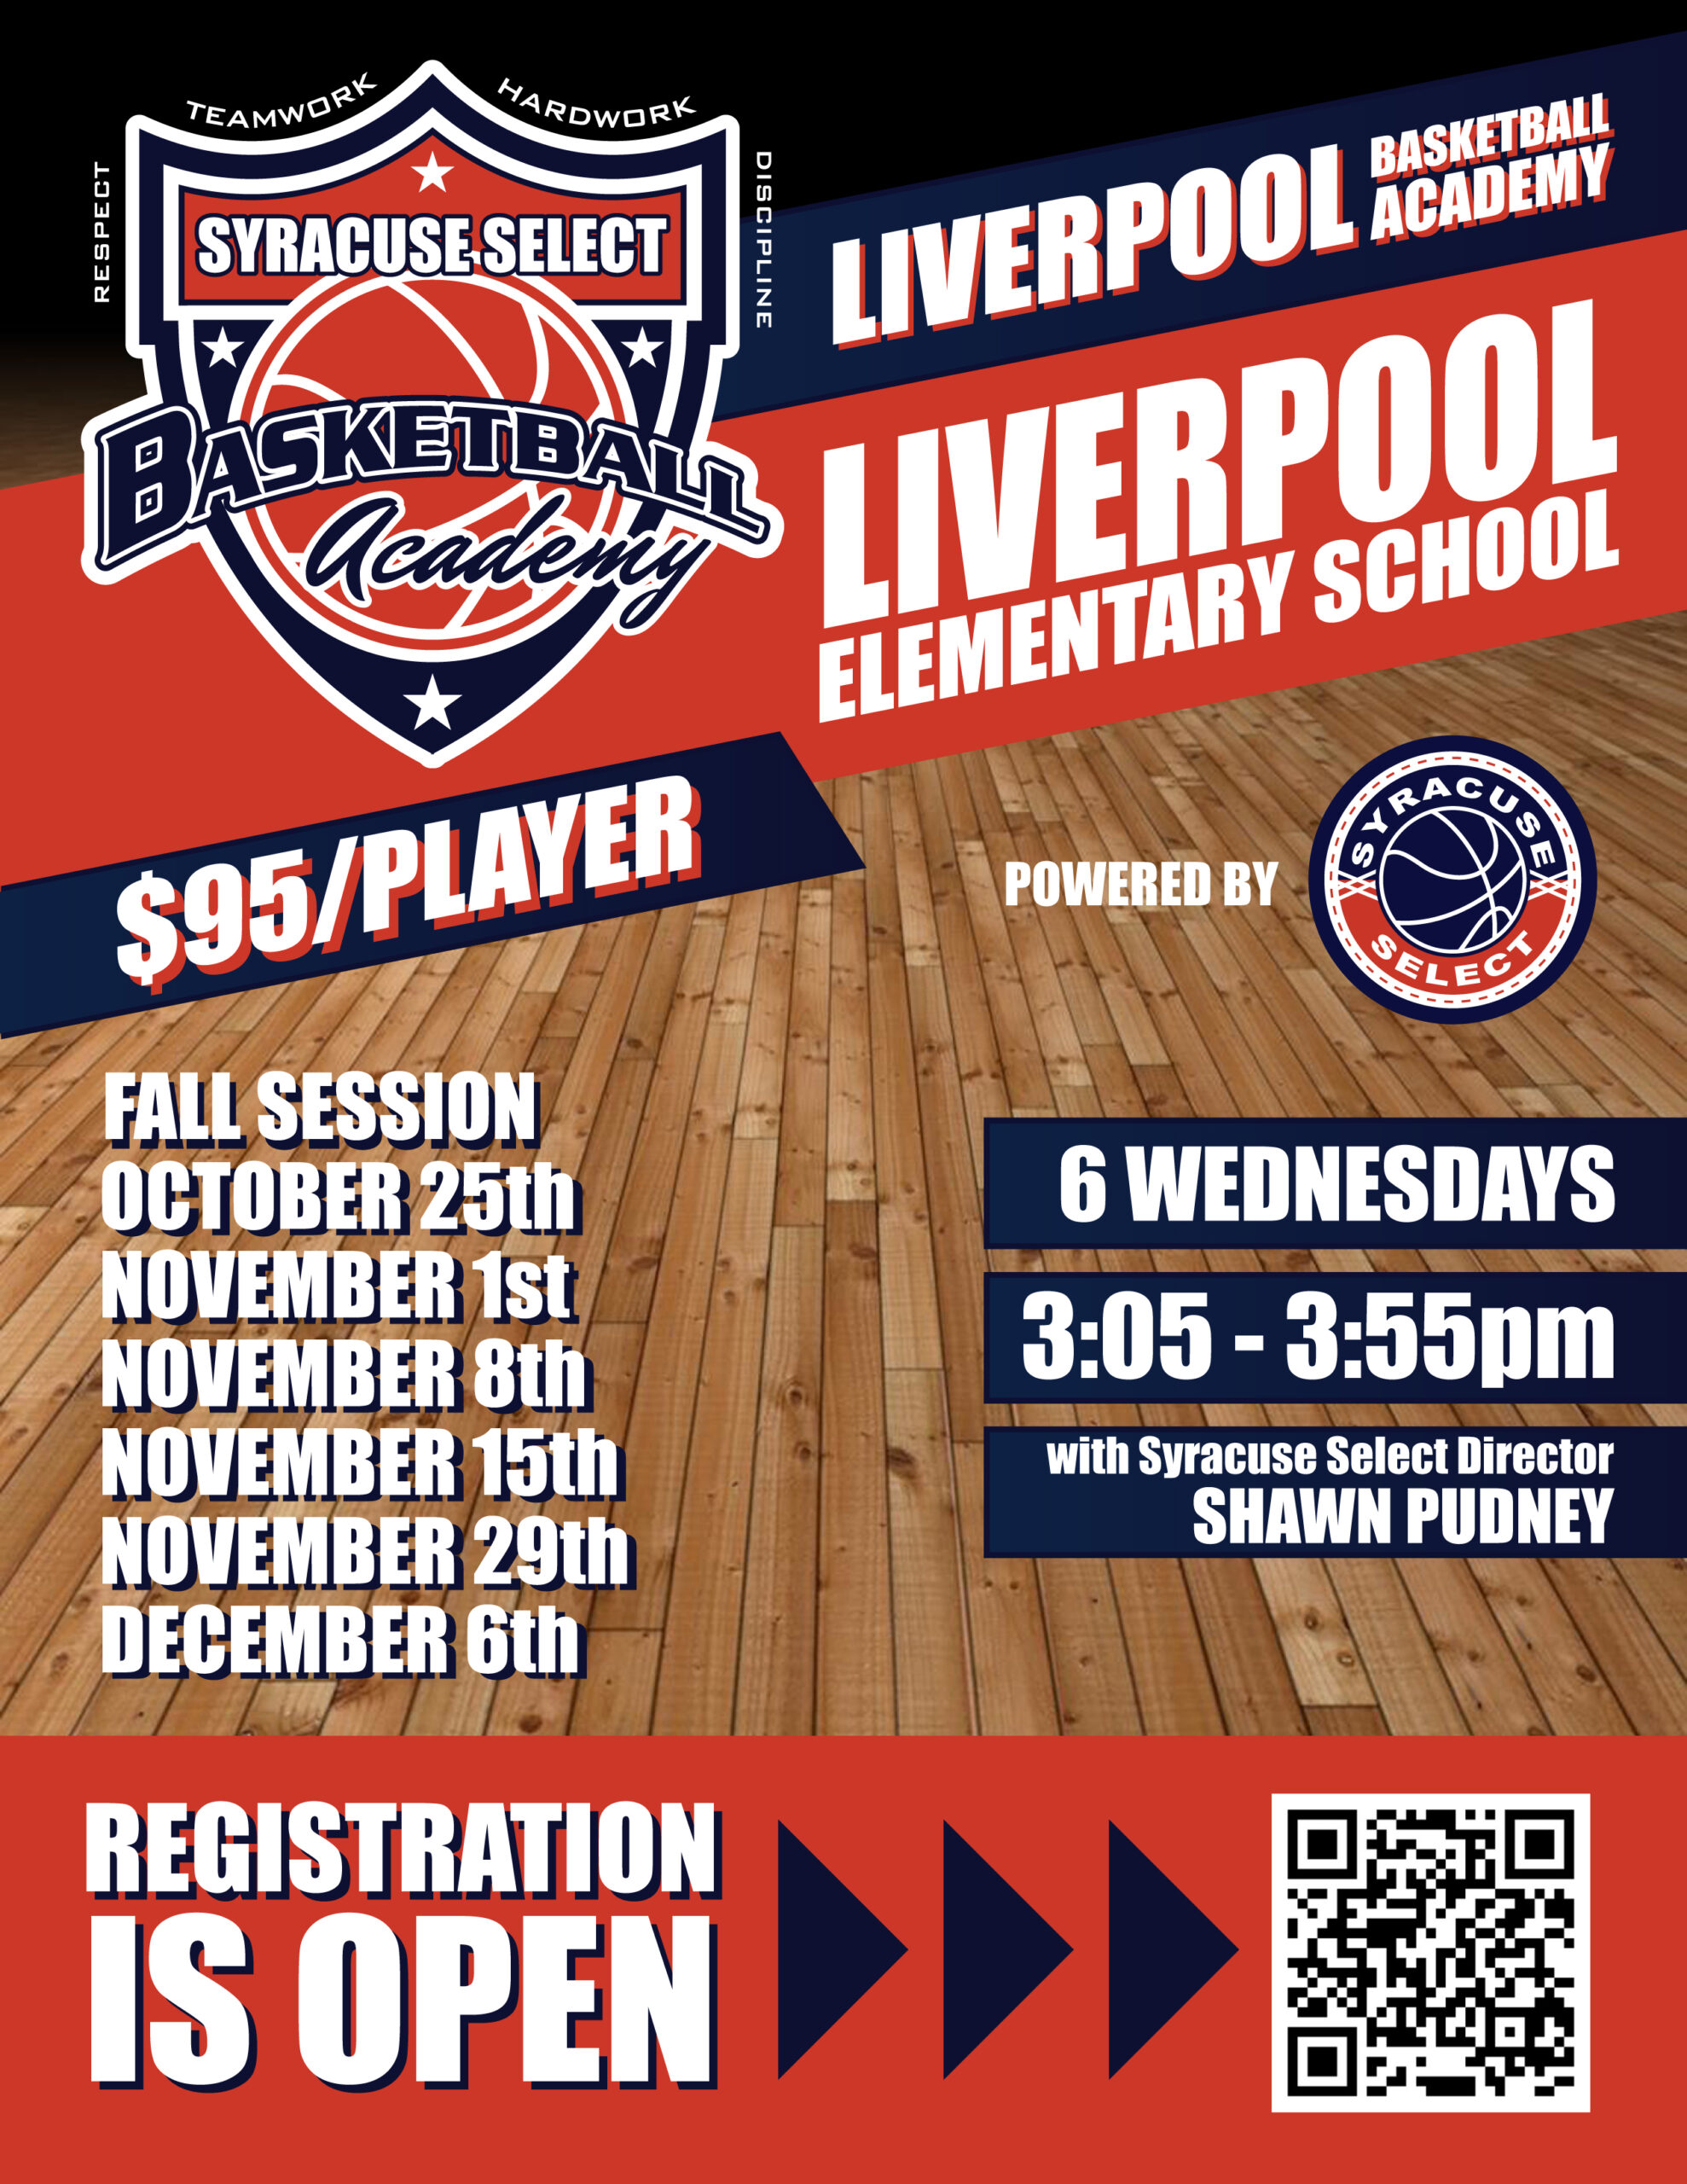 Flyer for the Syracuse Select Basketball Academy with Shawn Pudney